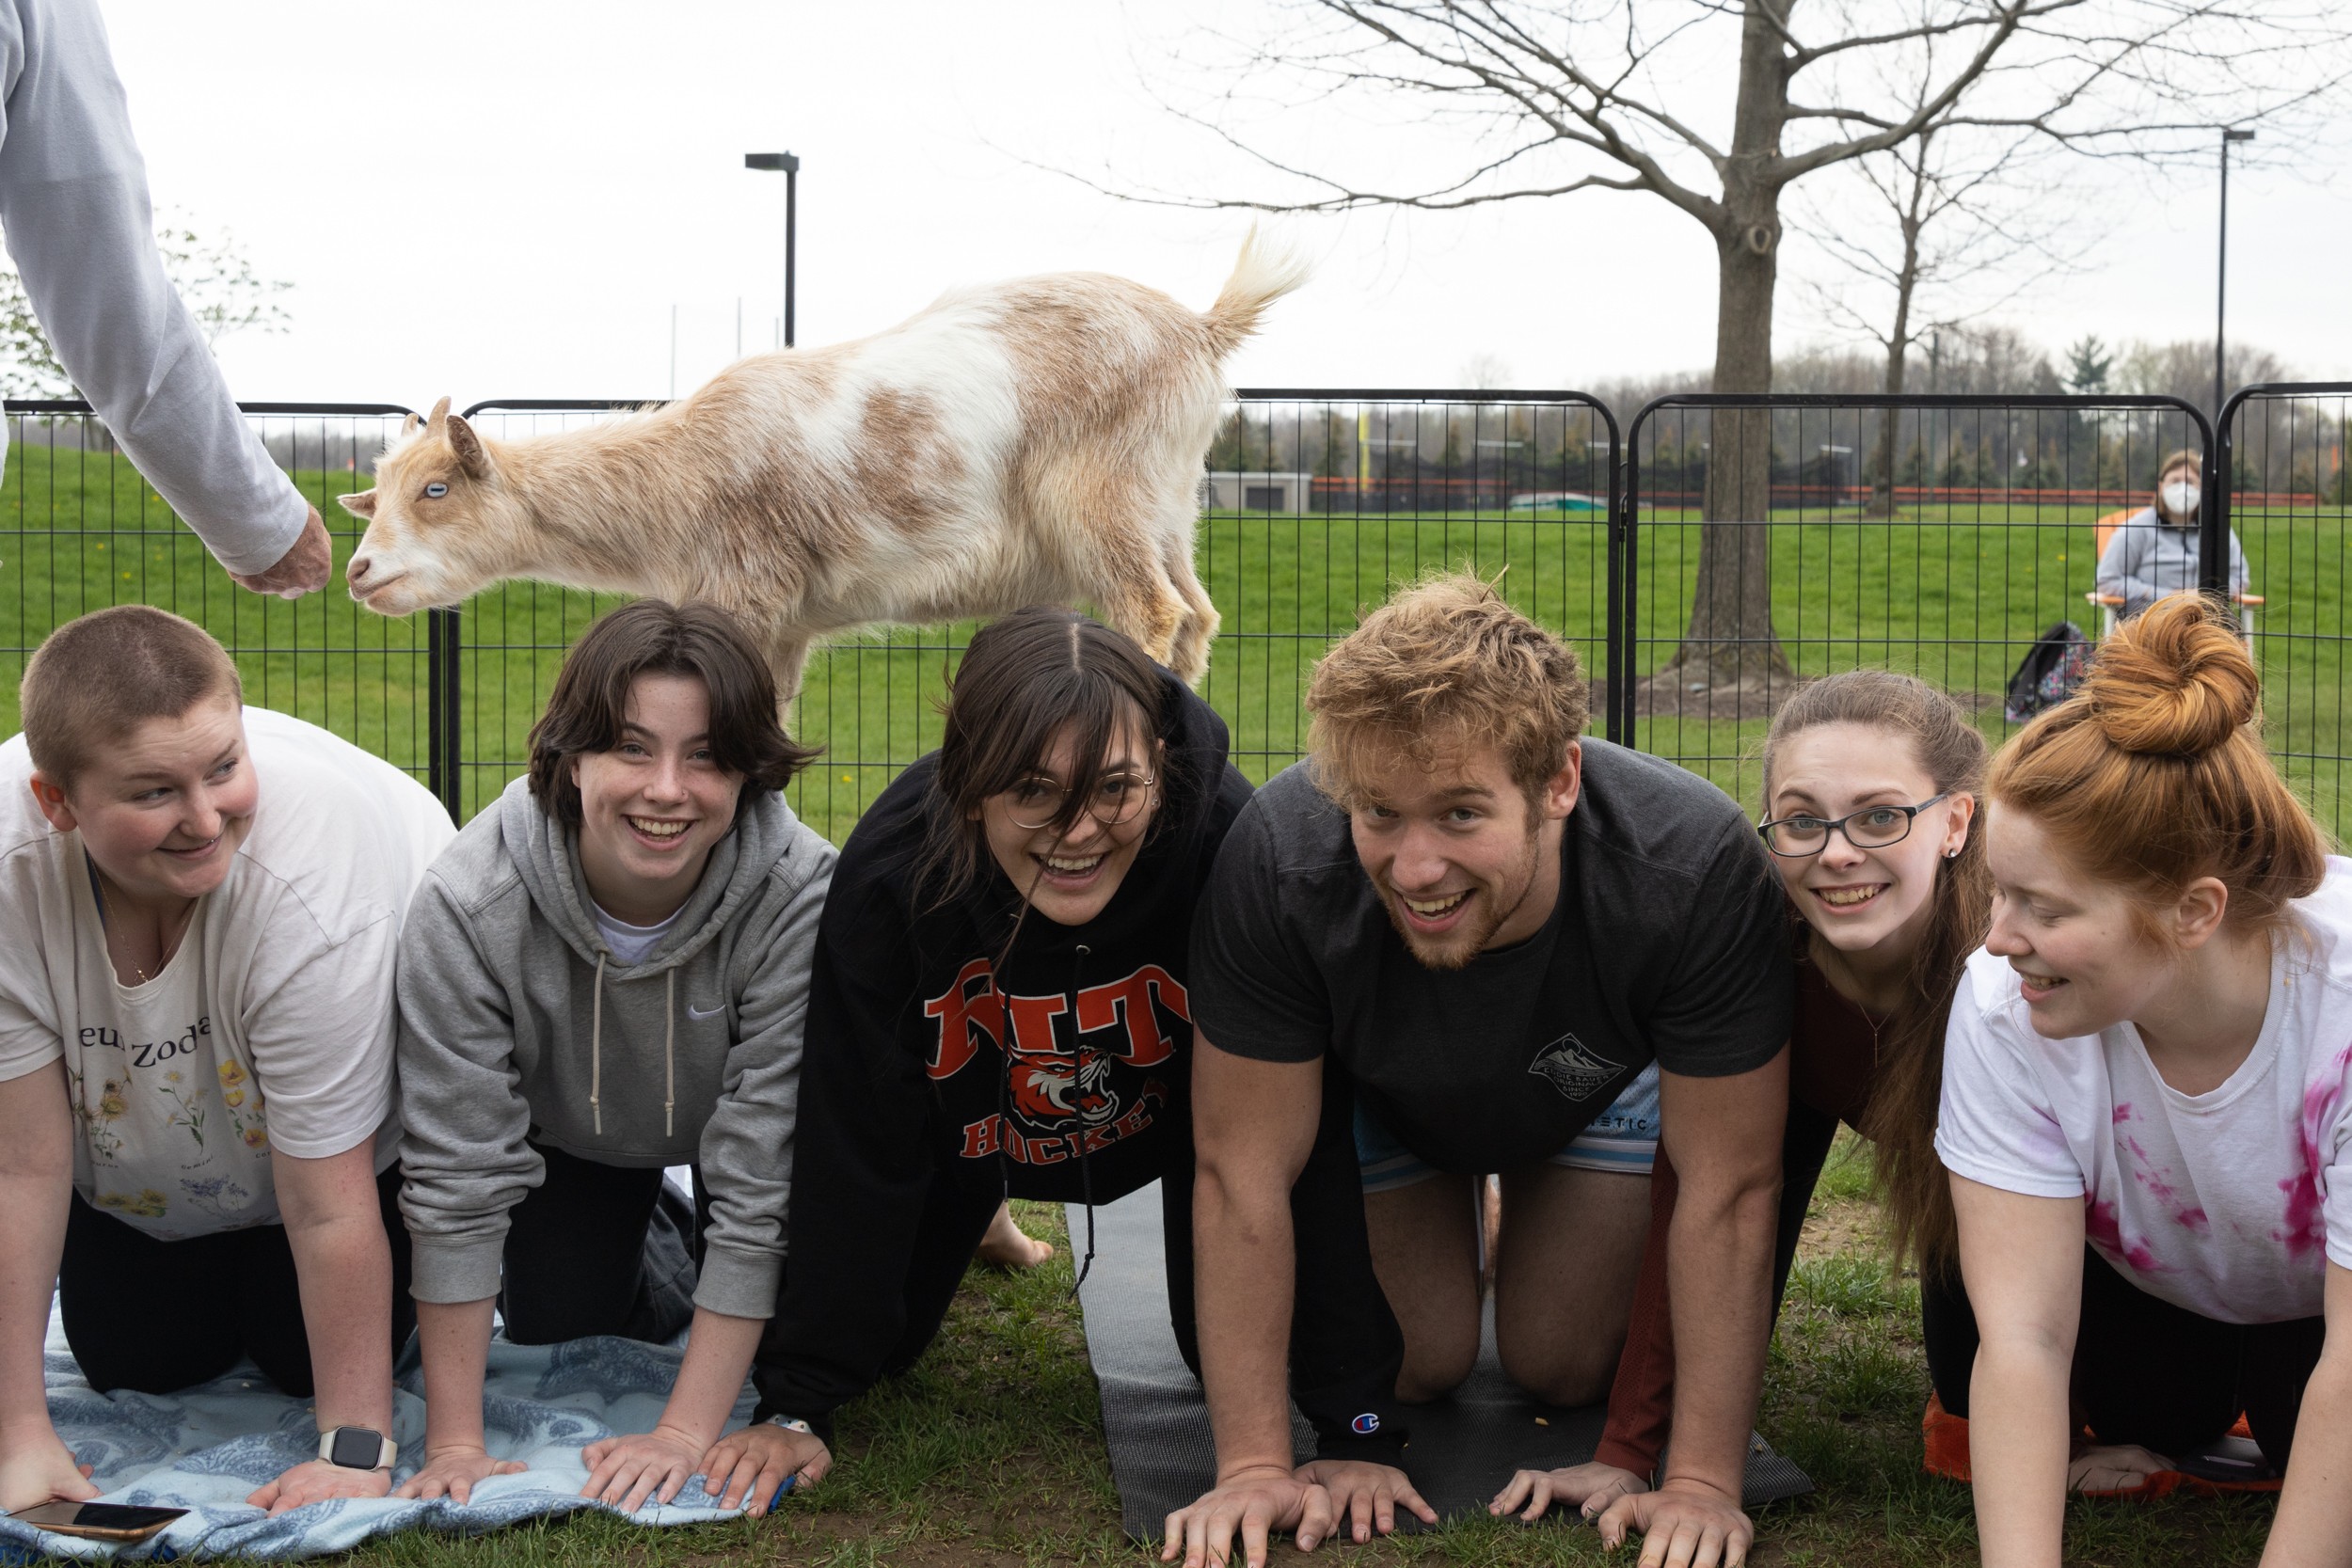 Students on hands and knees beaming with happiness as a small goat crawls across their backs